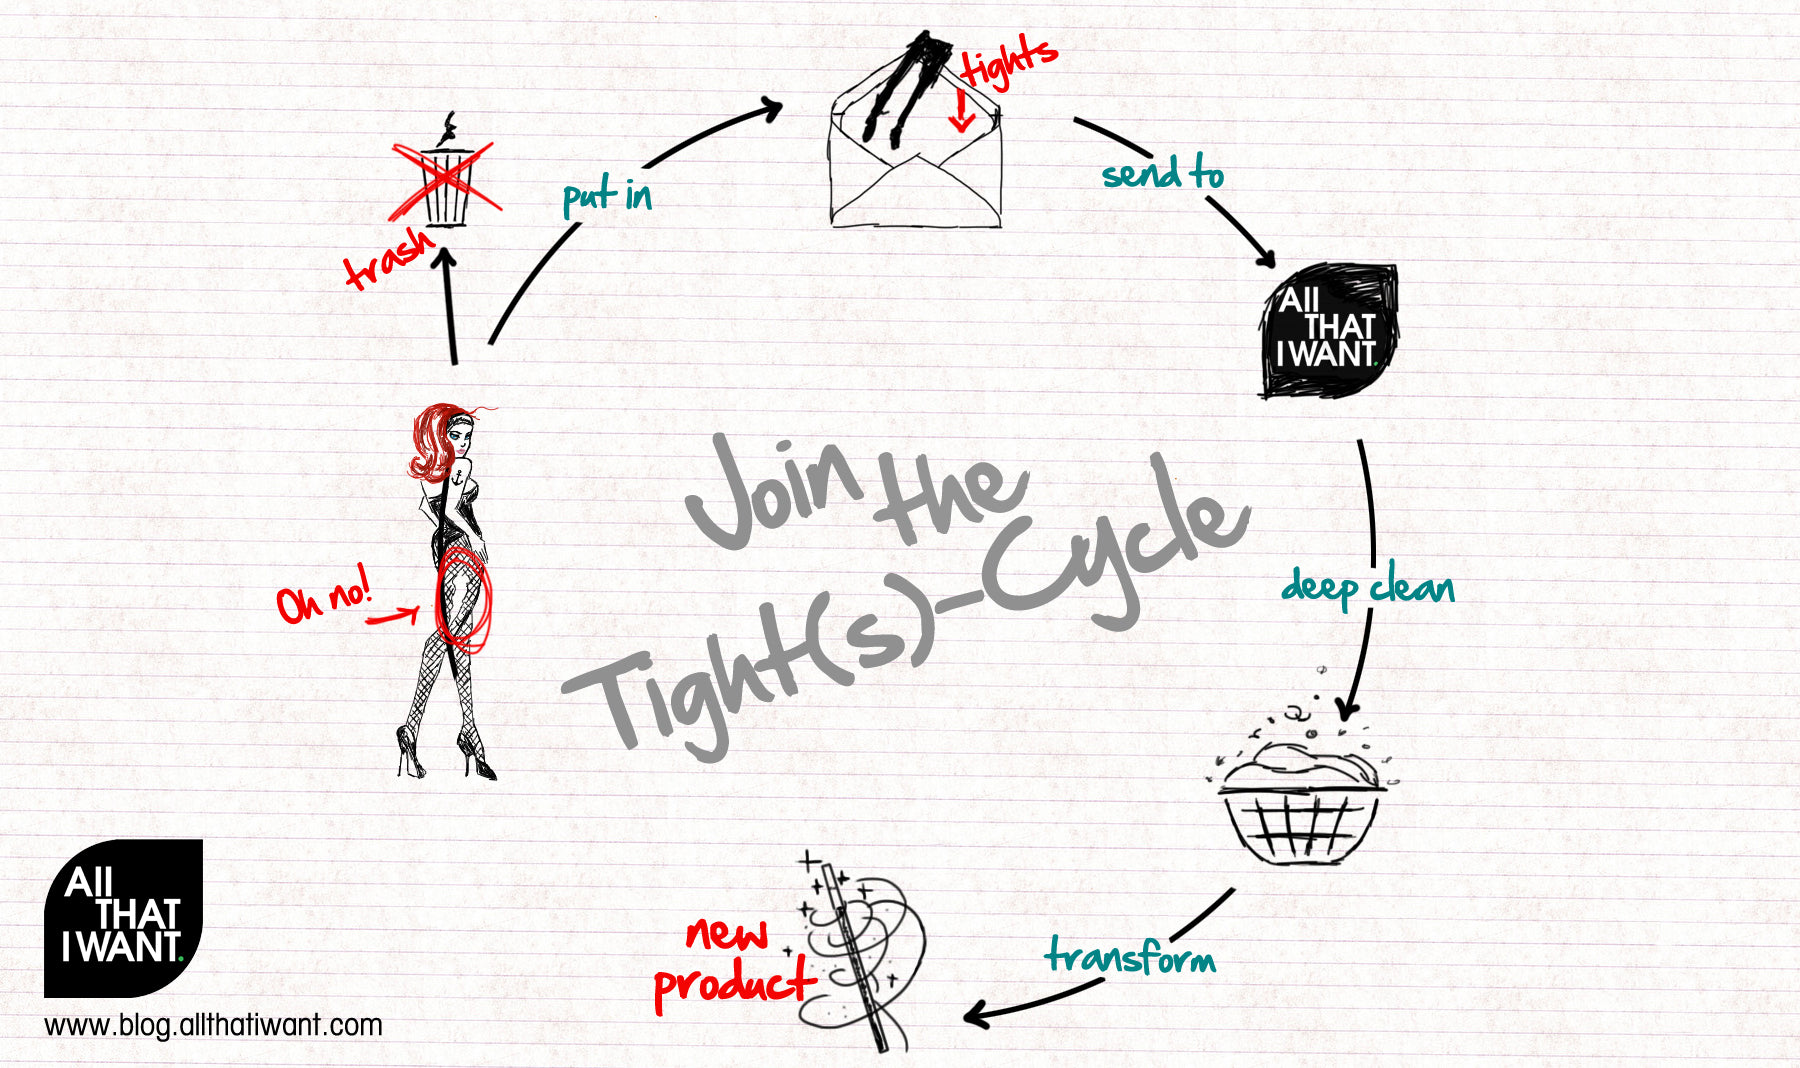 The Story of the Tight(s) Cycle